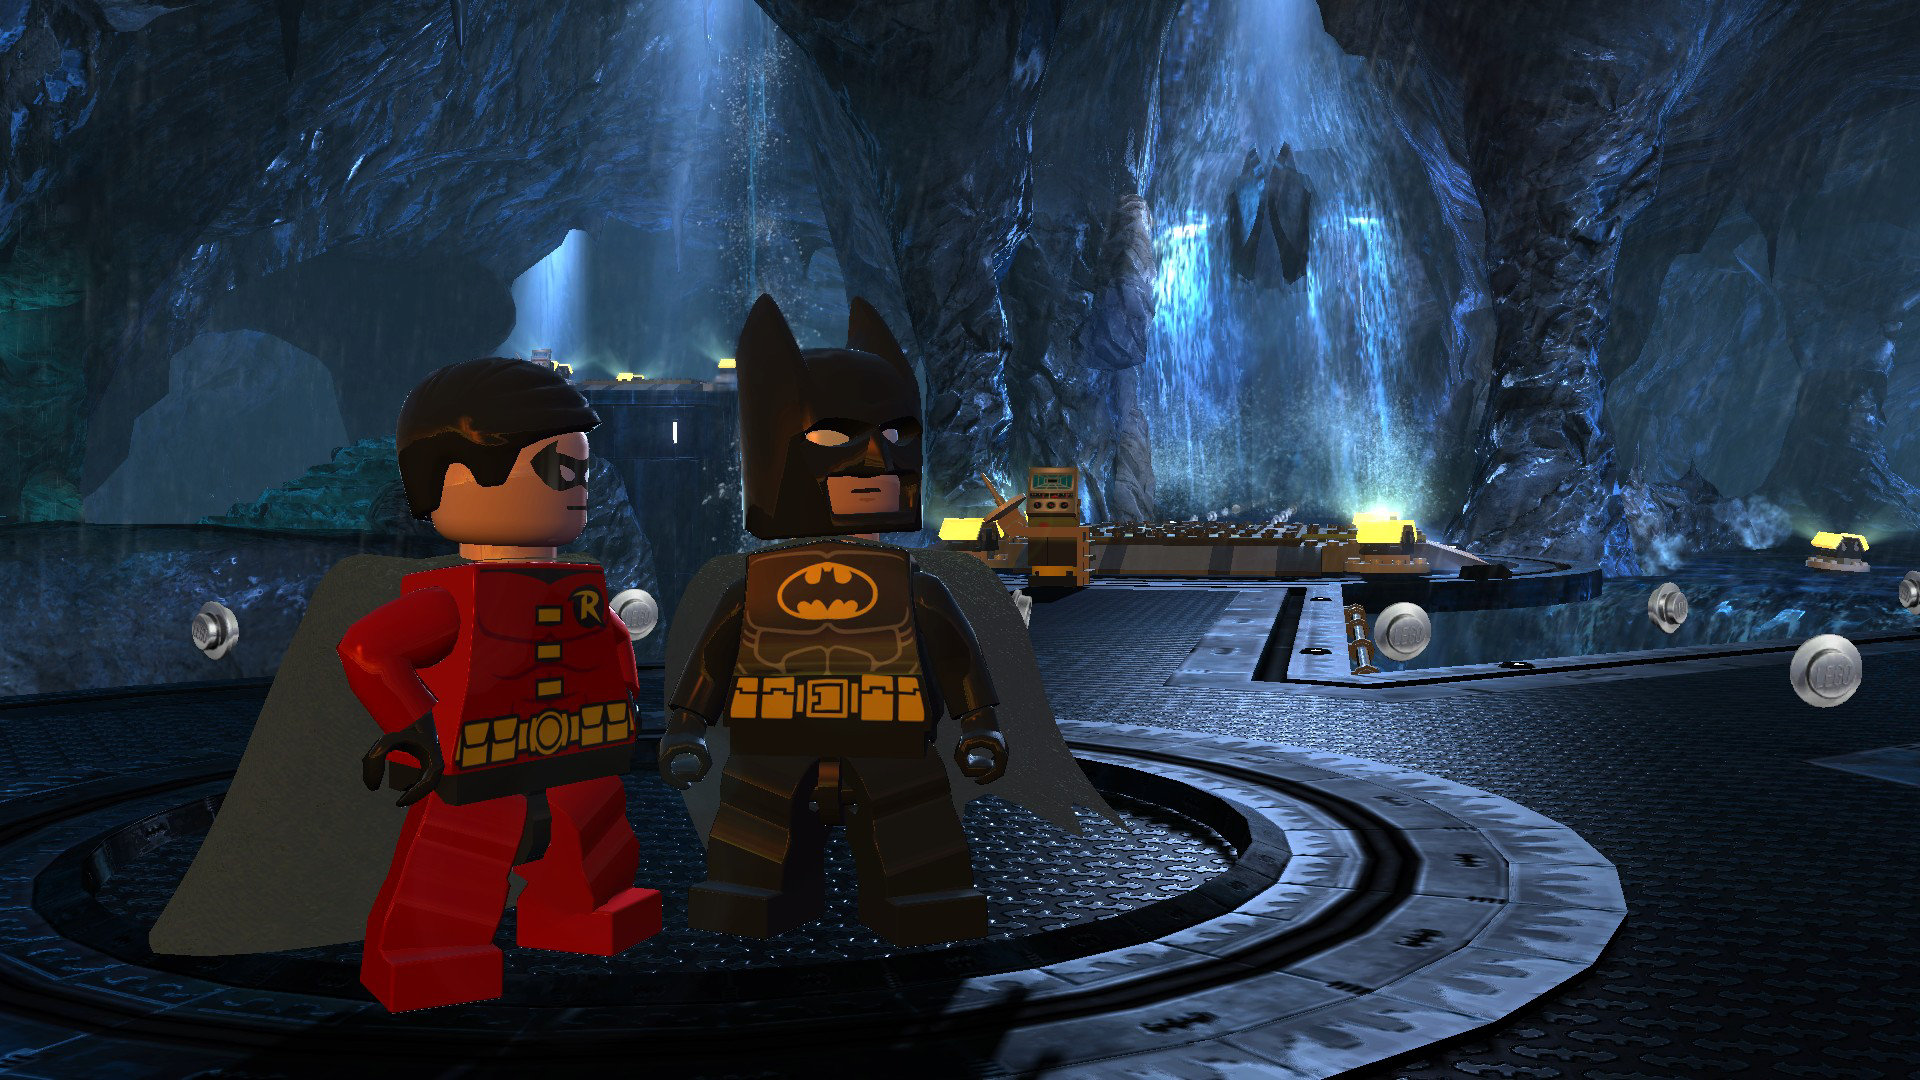 A Brief Guide to All the Lego Games - PC